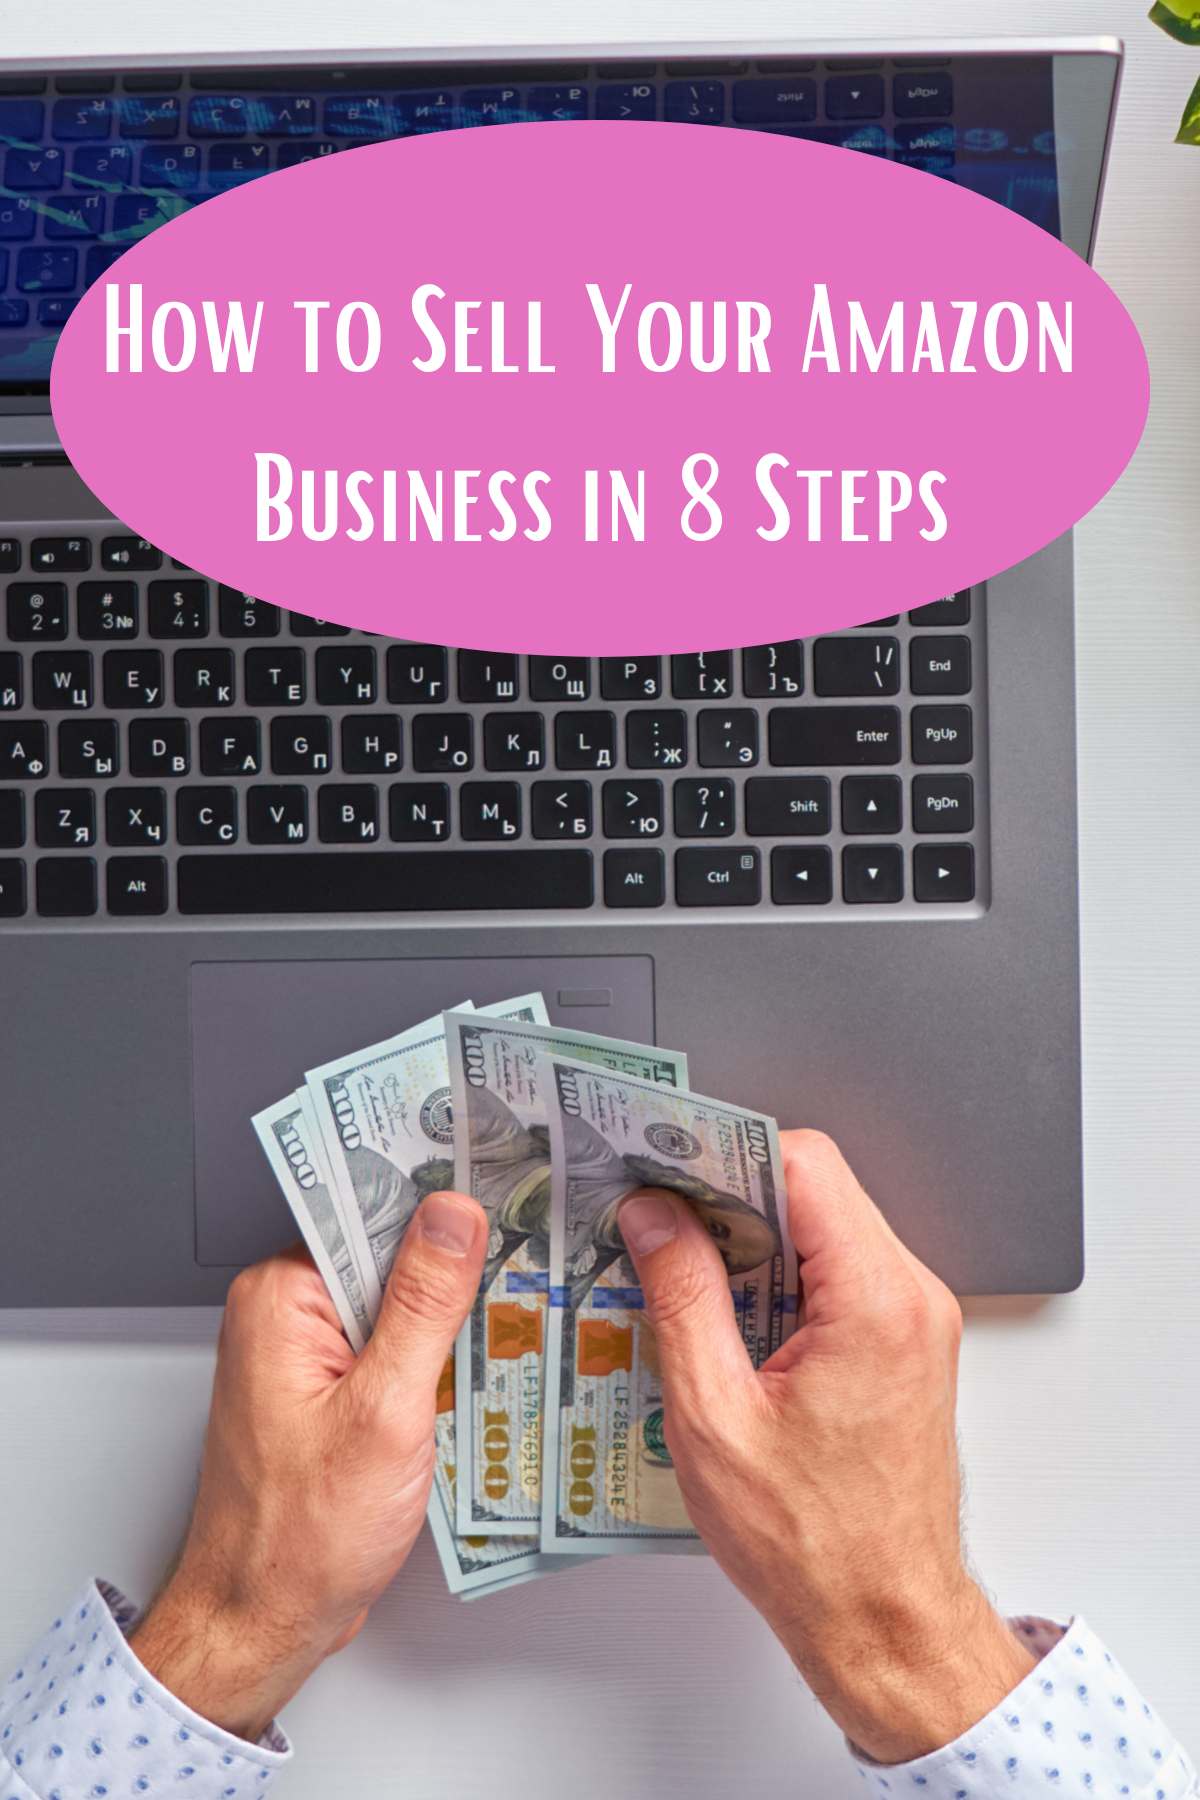 How to sell your amazon business in 8 steps.